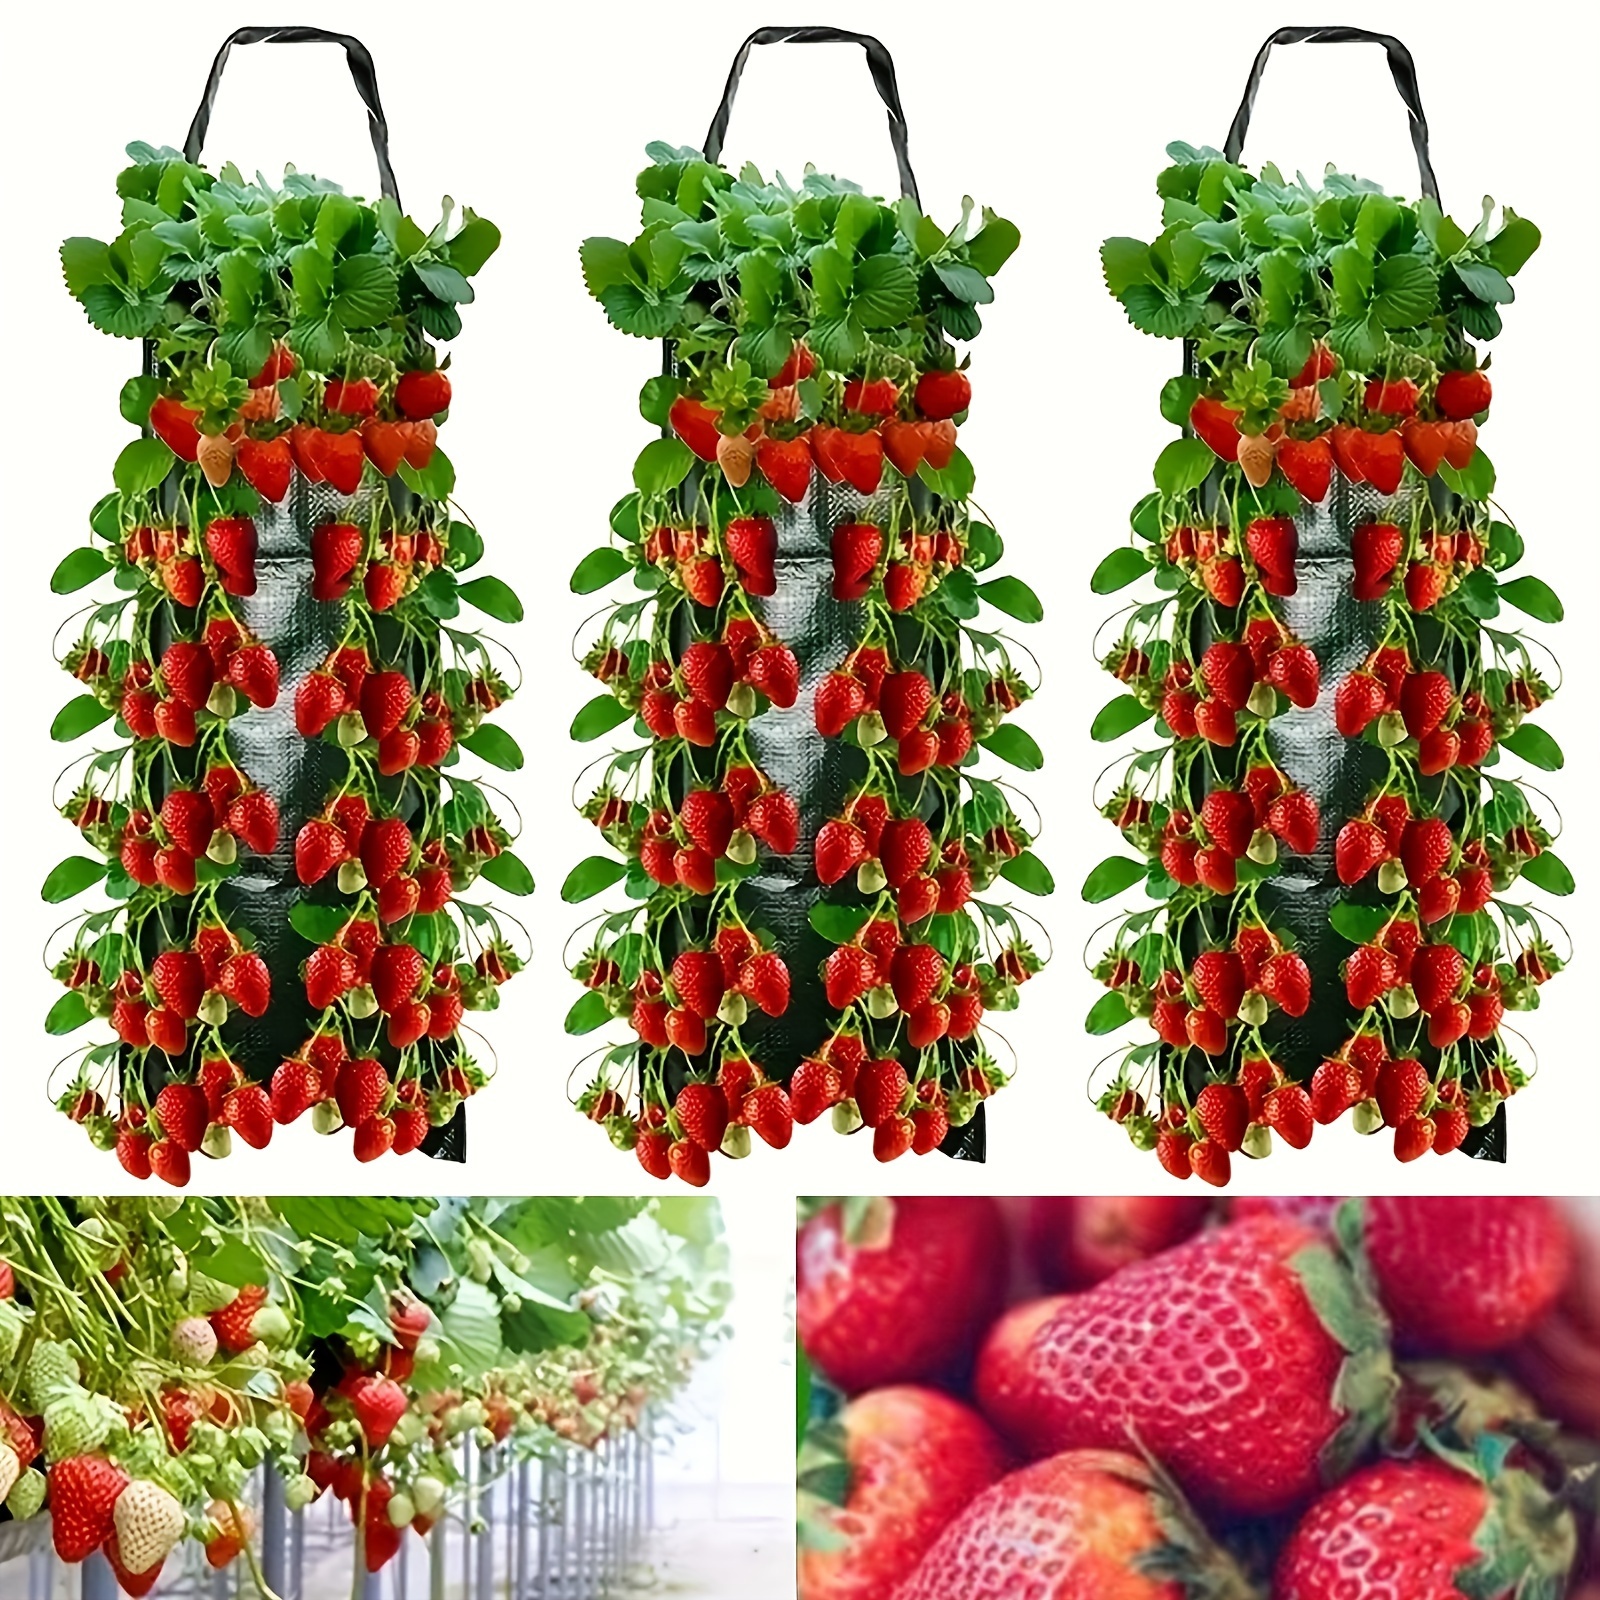 

3pcs, Hanging Strawberry Planter Bag, Strawberry Grow Bag With 8 Holes, For Strawberry Tomato And Chili Inverted Tomato Planter Vegetable Grow Bag, Planter, Flower Pot And Container Accessories